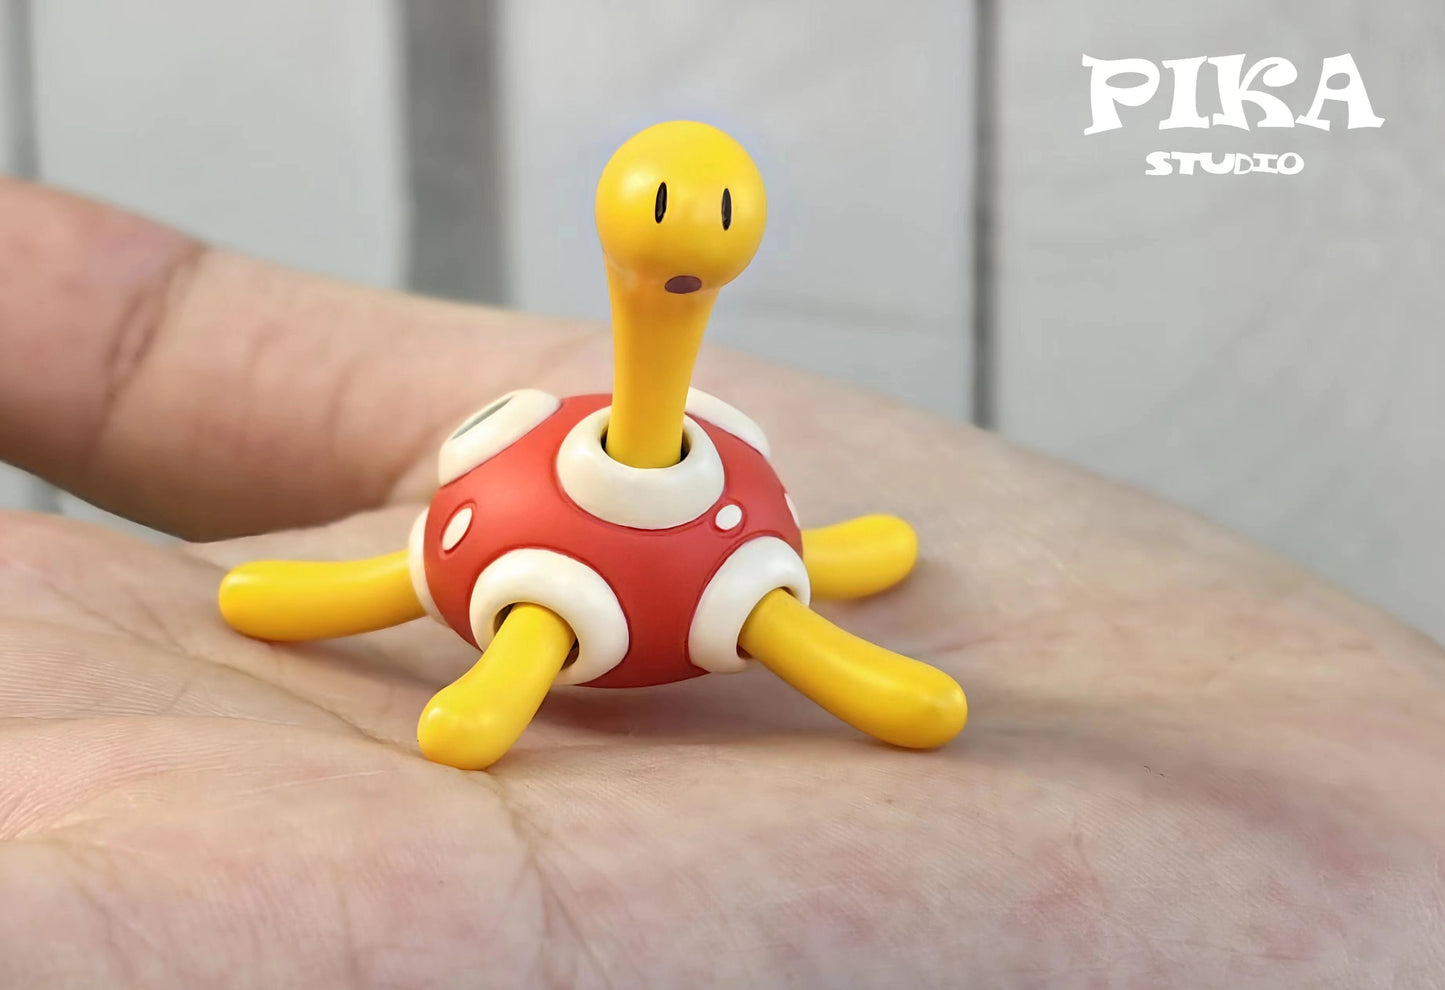 [PREORDER CLOSED] 1/20 Scale World Figure [PIKA] - Shuckle